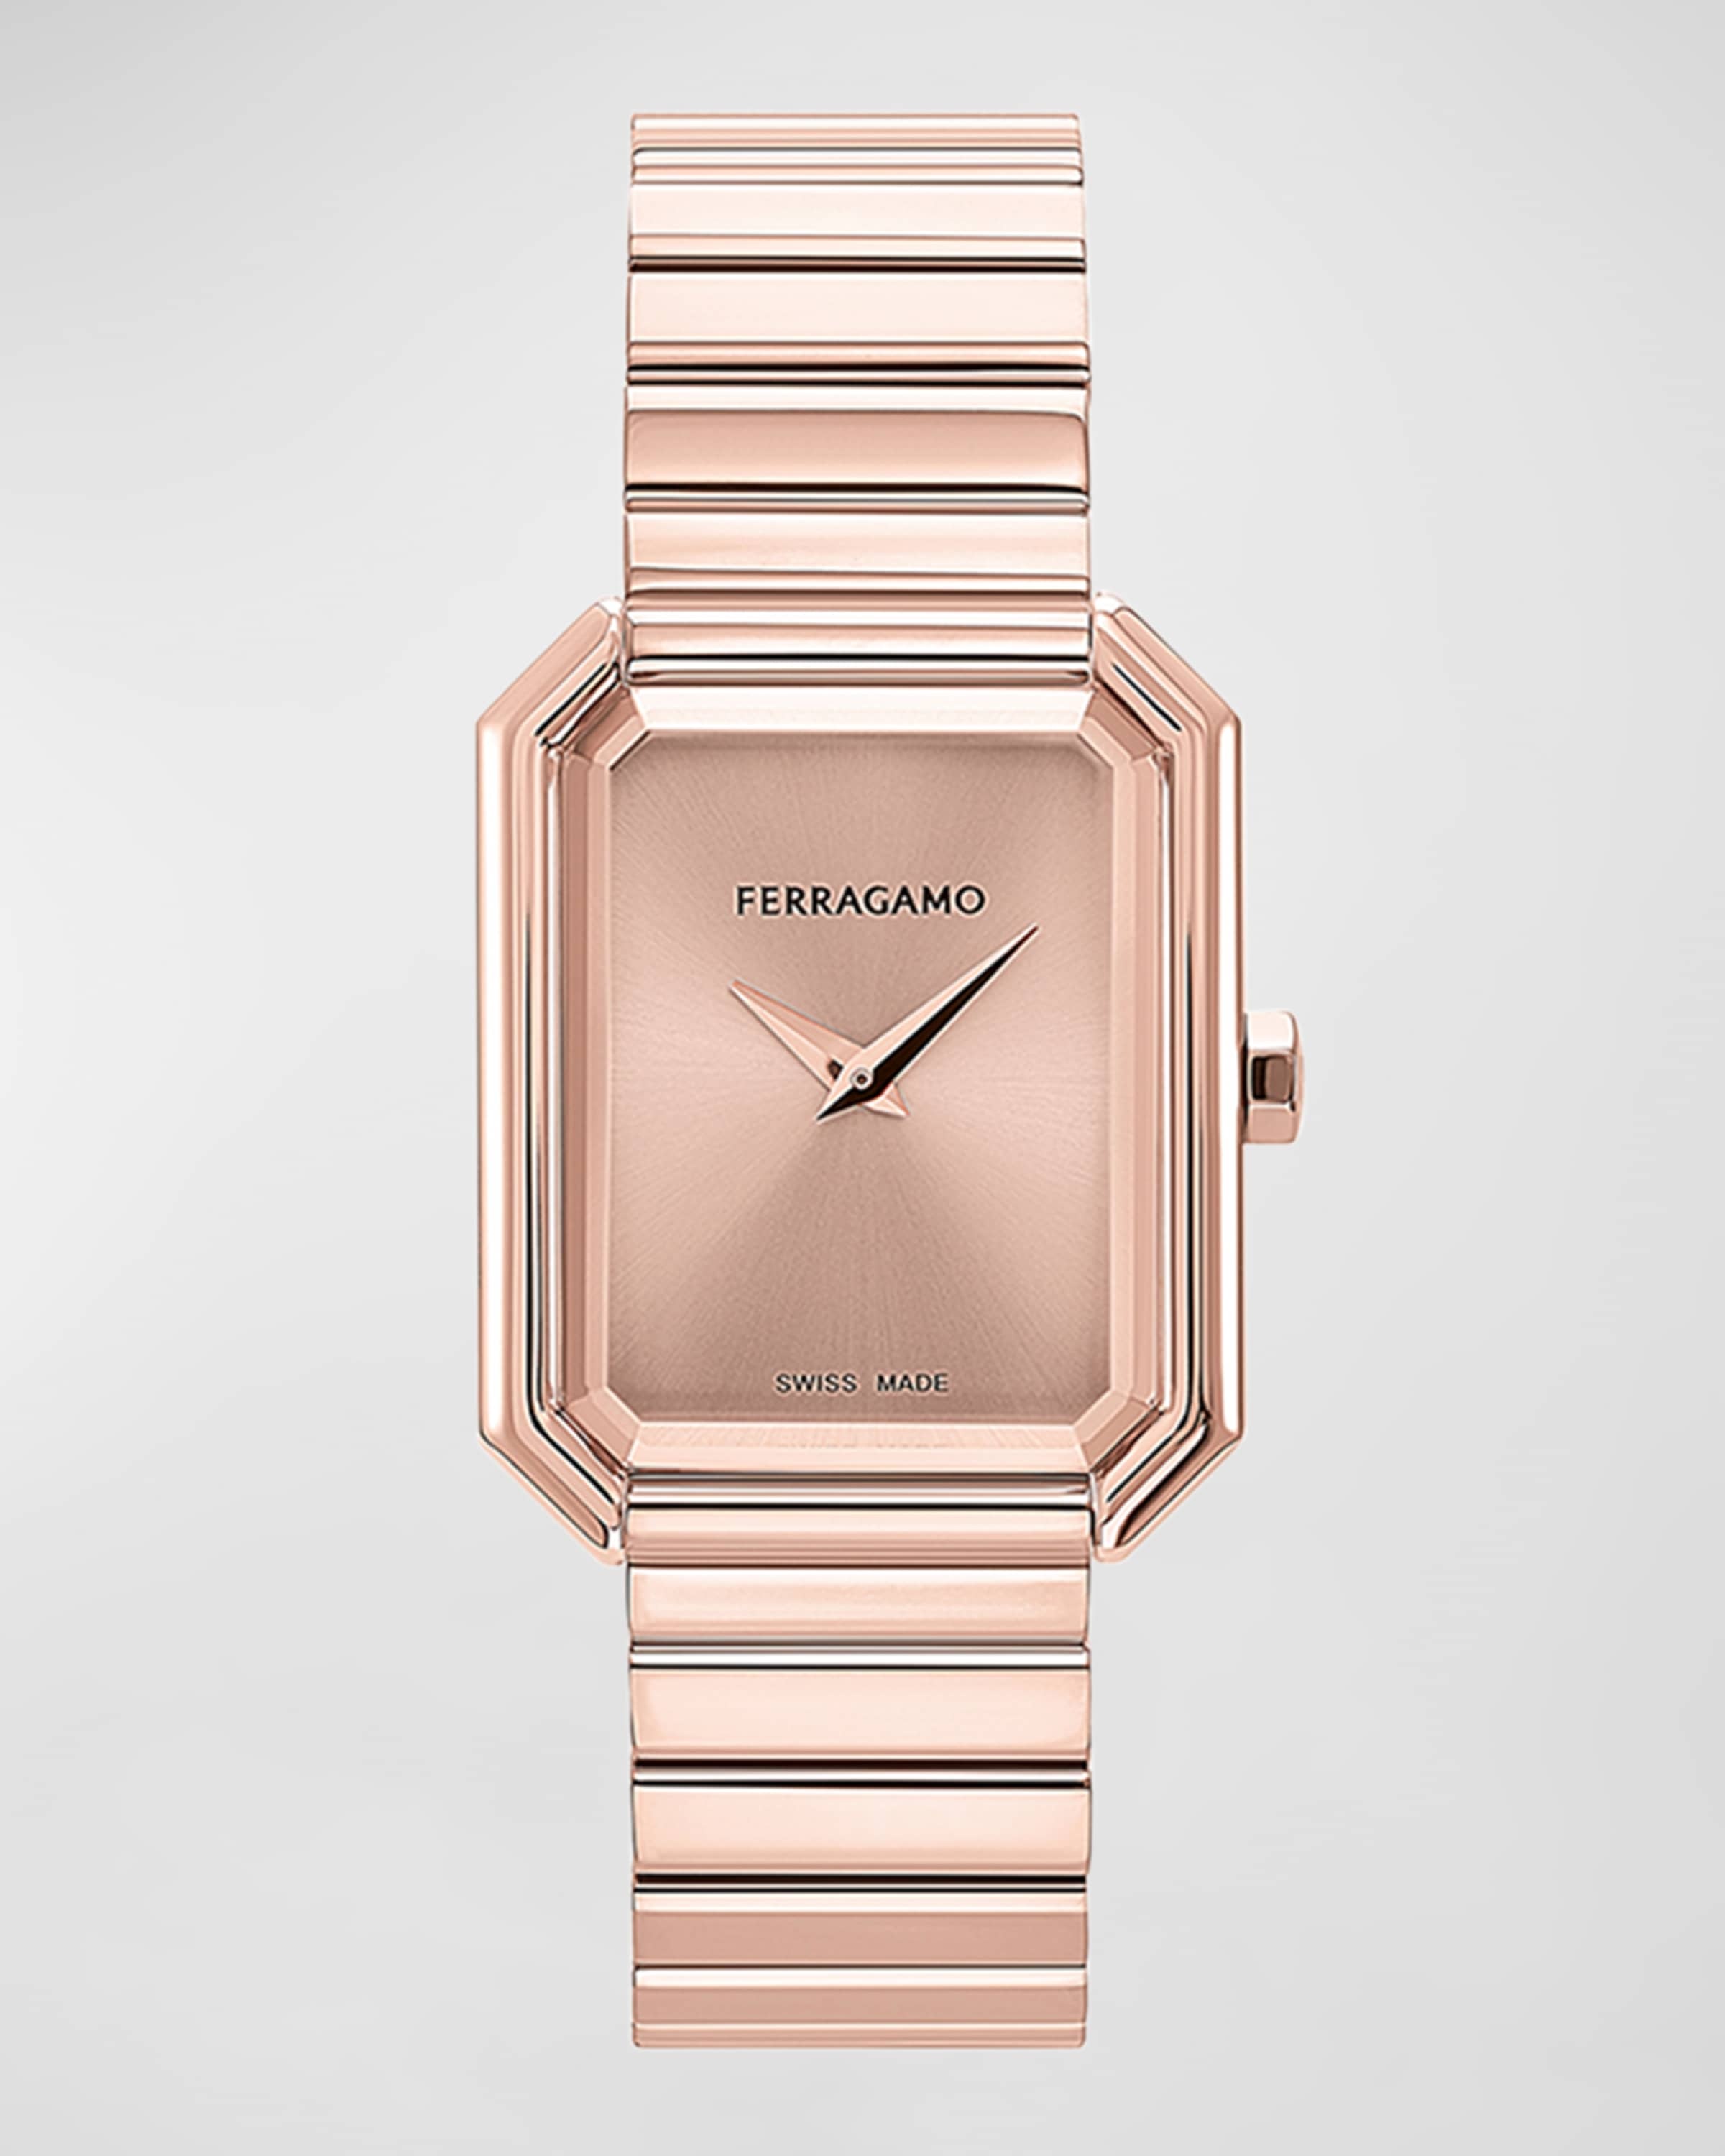 26.5x33.5mm Ferragamo Crystal Watch with Rose Gold Dial - 1